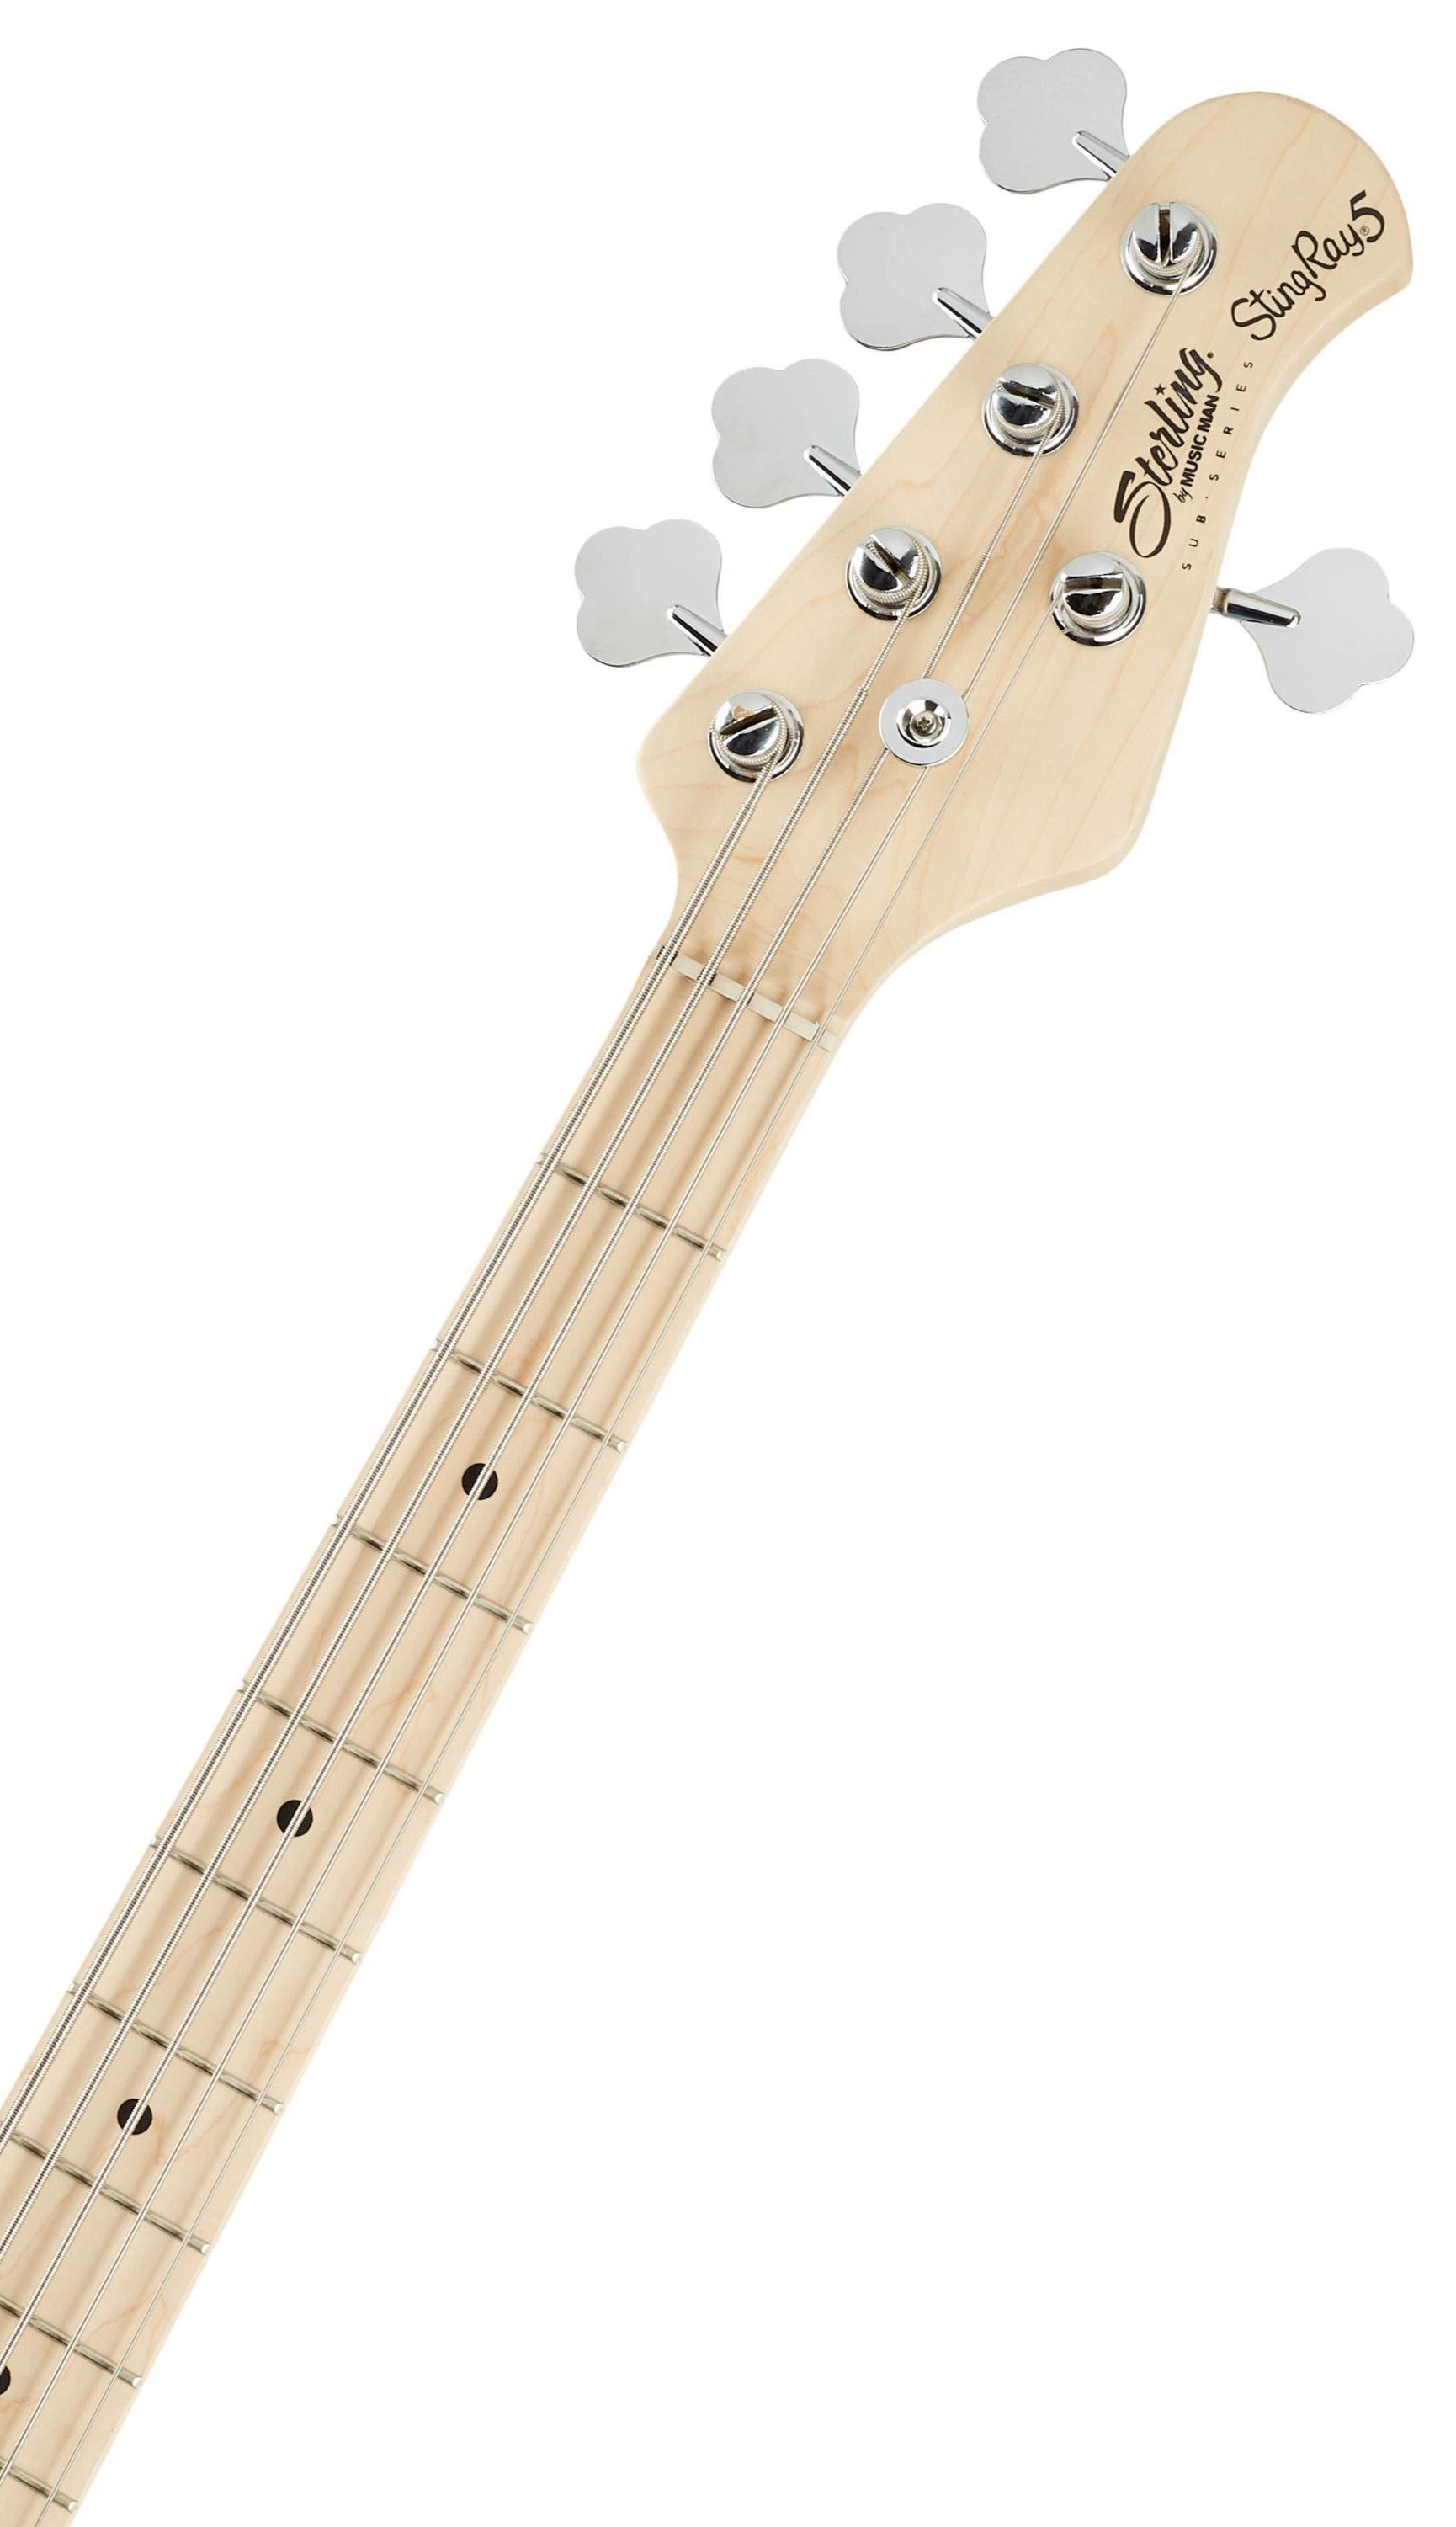 STERLING RAY5 5-STRING ELECTRIC BASS GUITAR SUB SERIES - MINT GREEN COLOR (RAY-5/ RAY 5), STERLING, BASS GUITAR, sterling-bass-guitar-ray5-mgm, ZOSO MUSIC SDN BHD